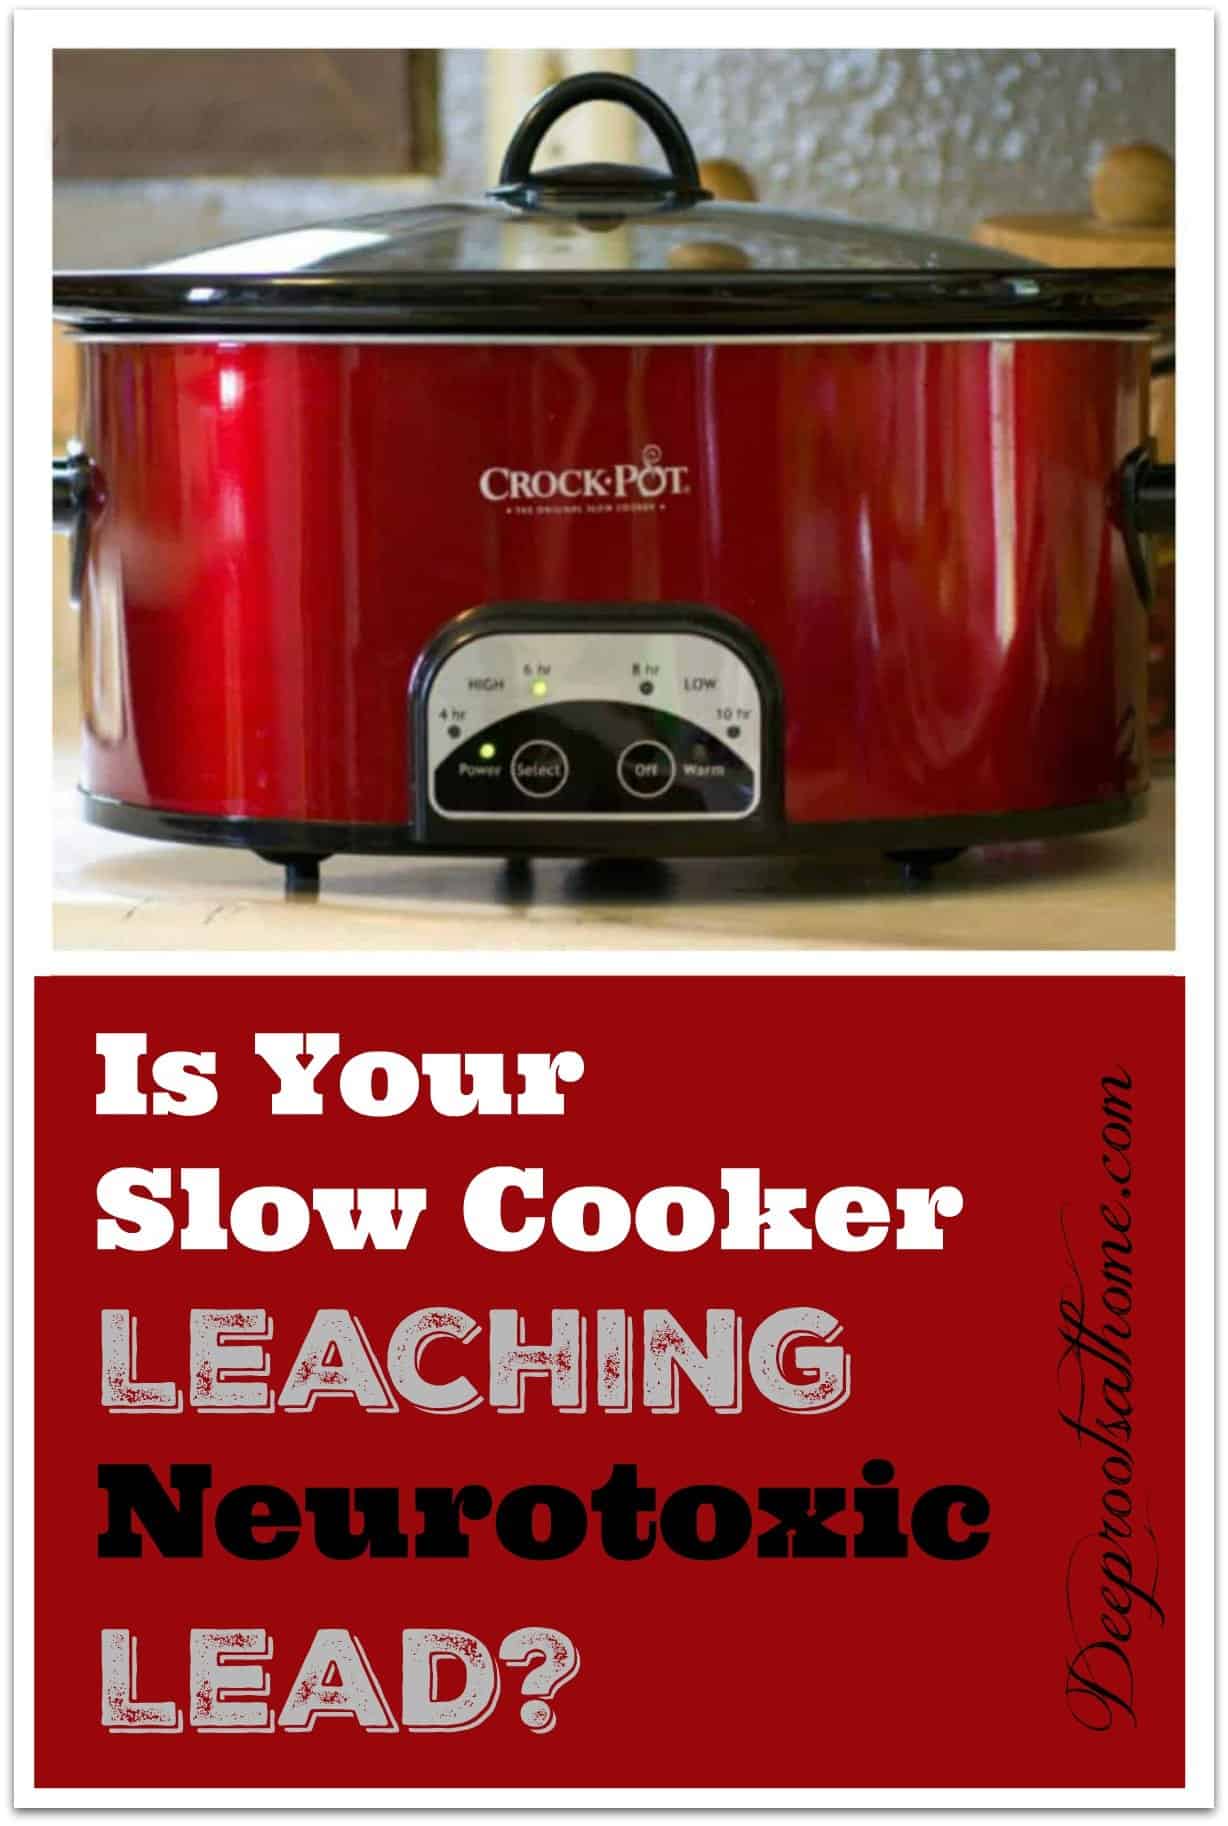 Could Your Slow Cooker Be Leaching Neurotoxic Lead? A red Crock Pot